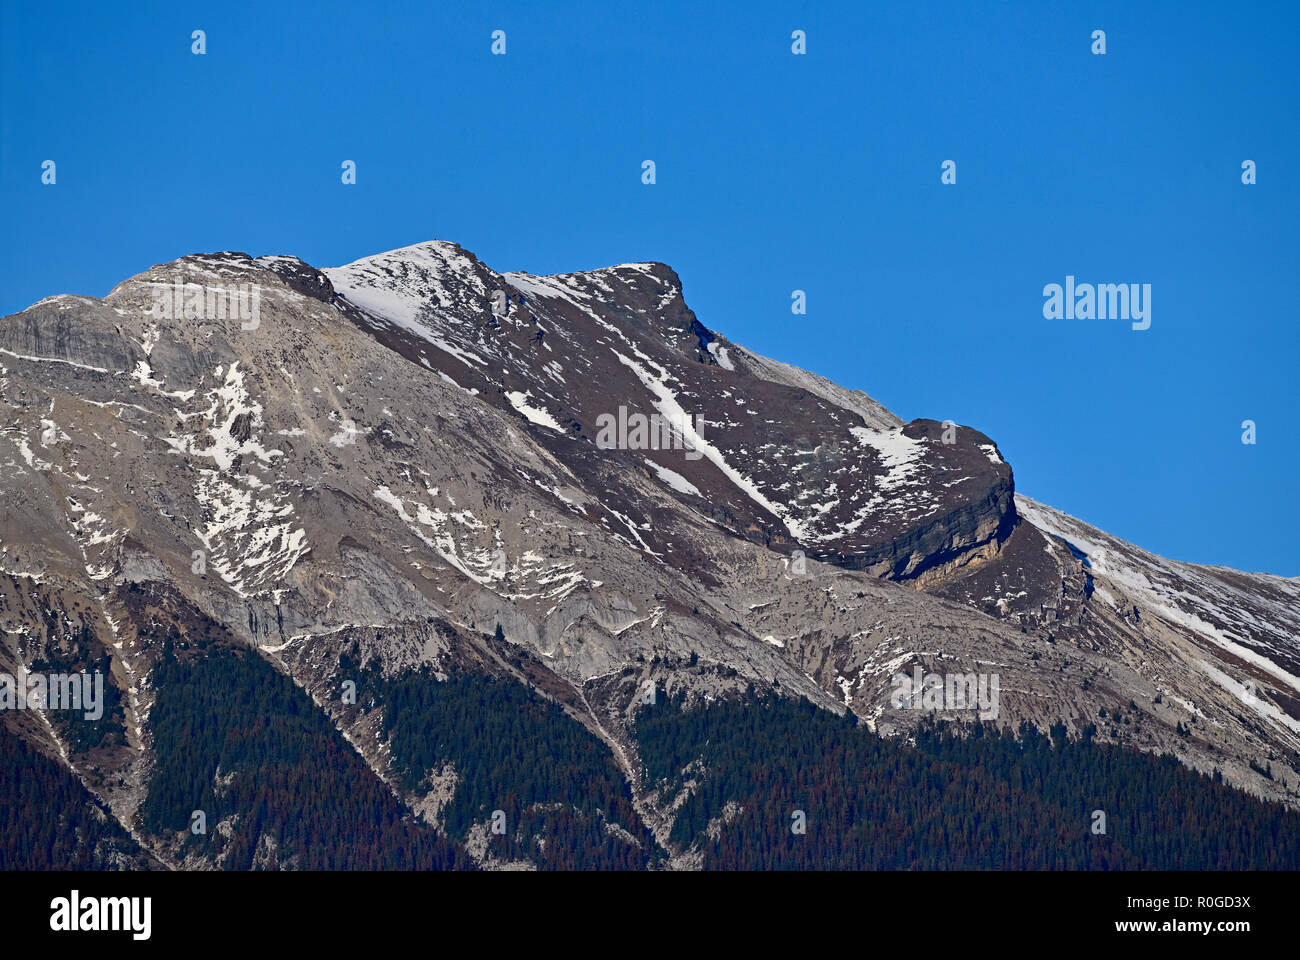 A close up image of 'Roche Bonhomme' affectionally known as 'The Old Man in the Mountain' Stock Photo